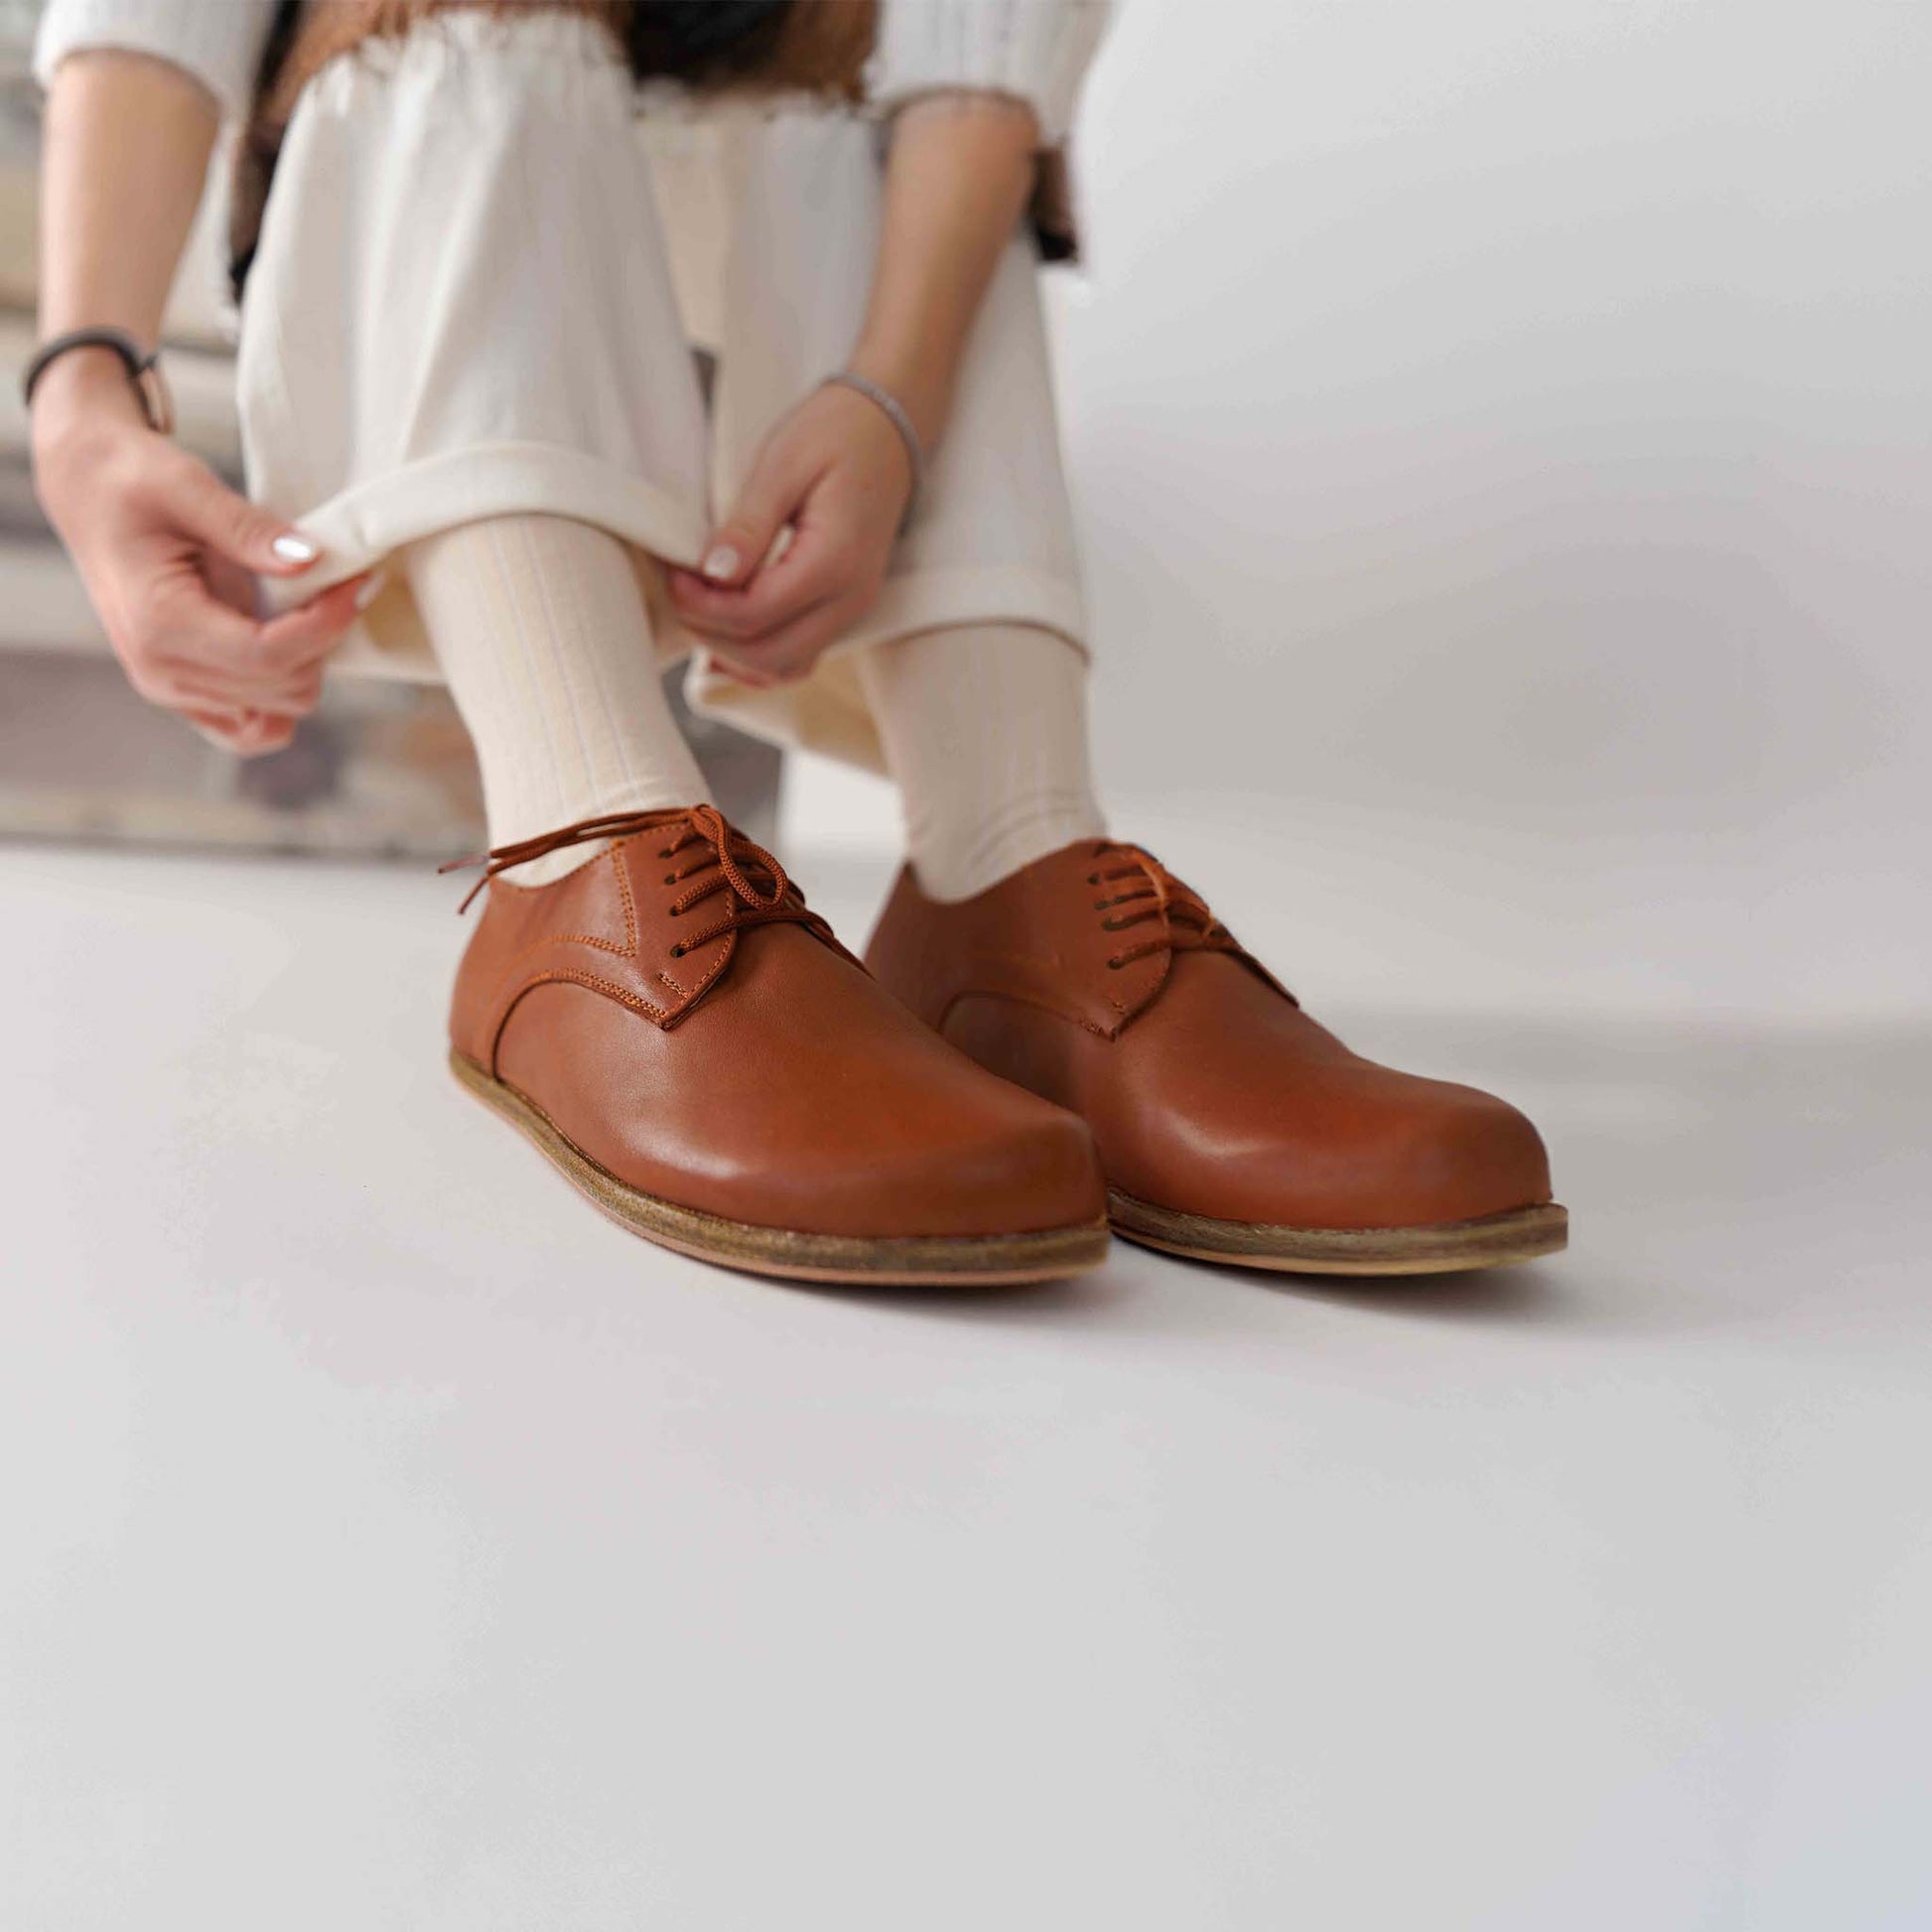 Model adjusting pants, wearing Locris Tan Brown Leather Barefoot Women Oxfords, demonstrating casual and elegant style.